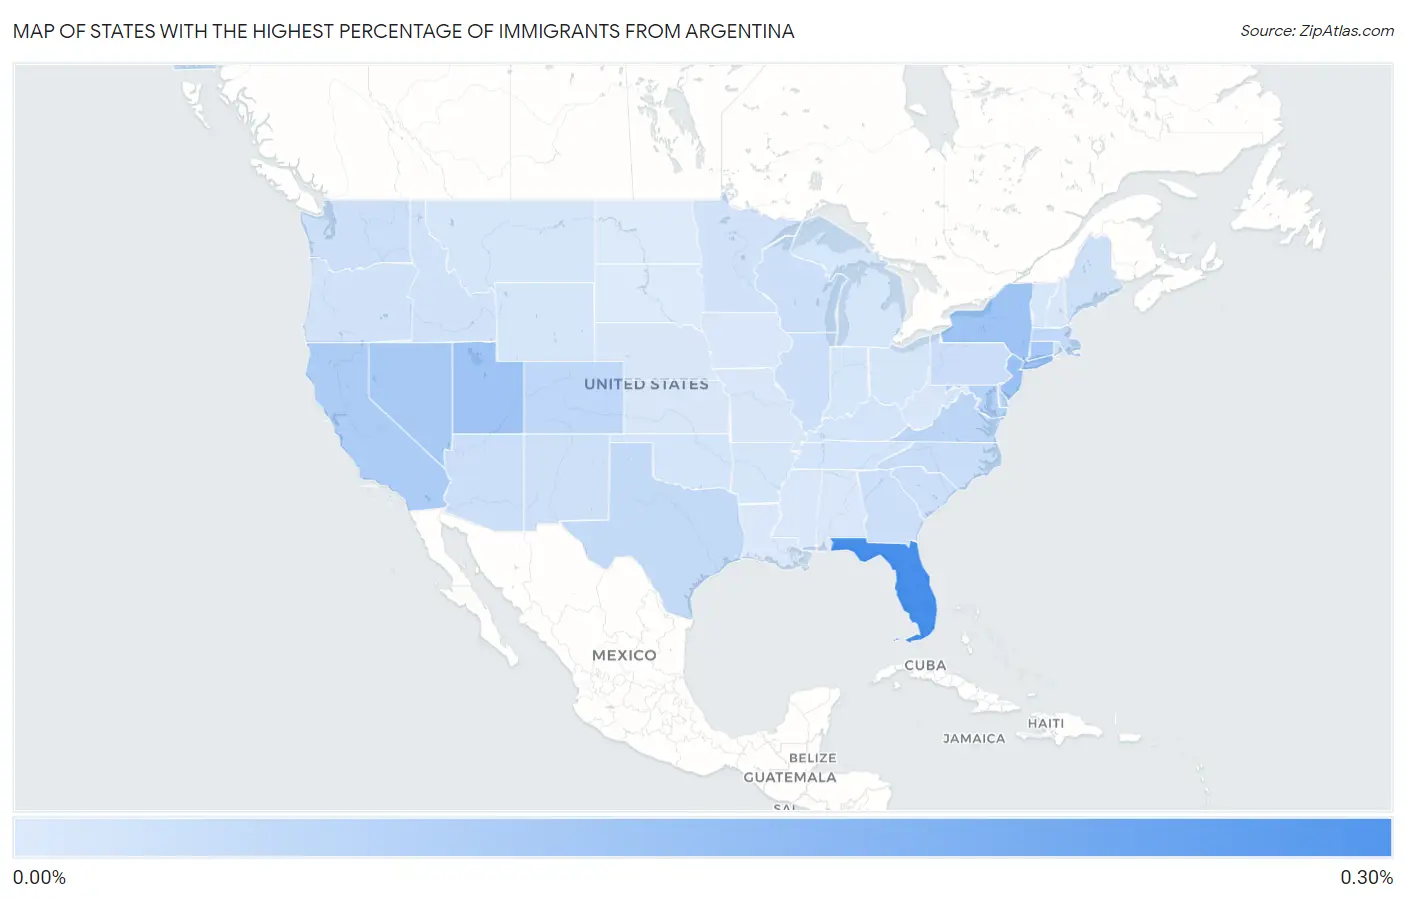 States with the Highest Percentage of Immigrants from Argentina in the United States Map